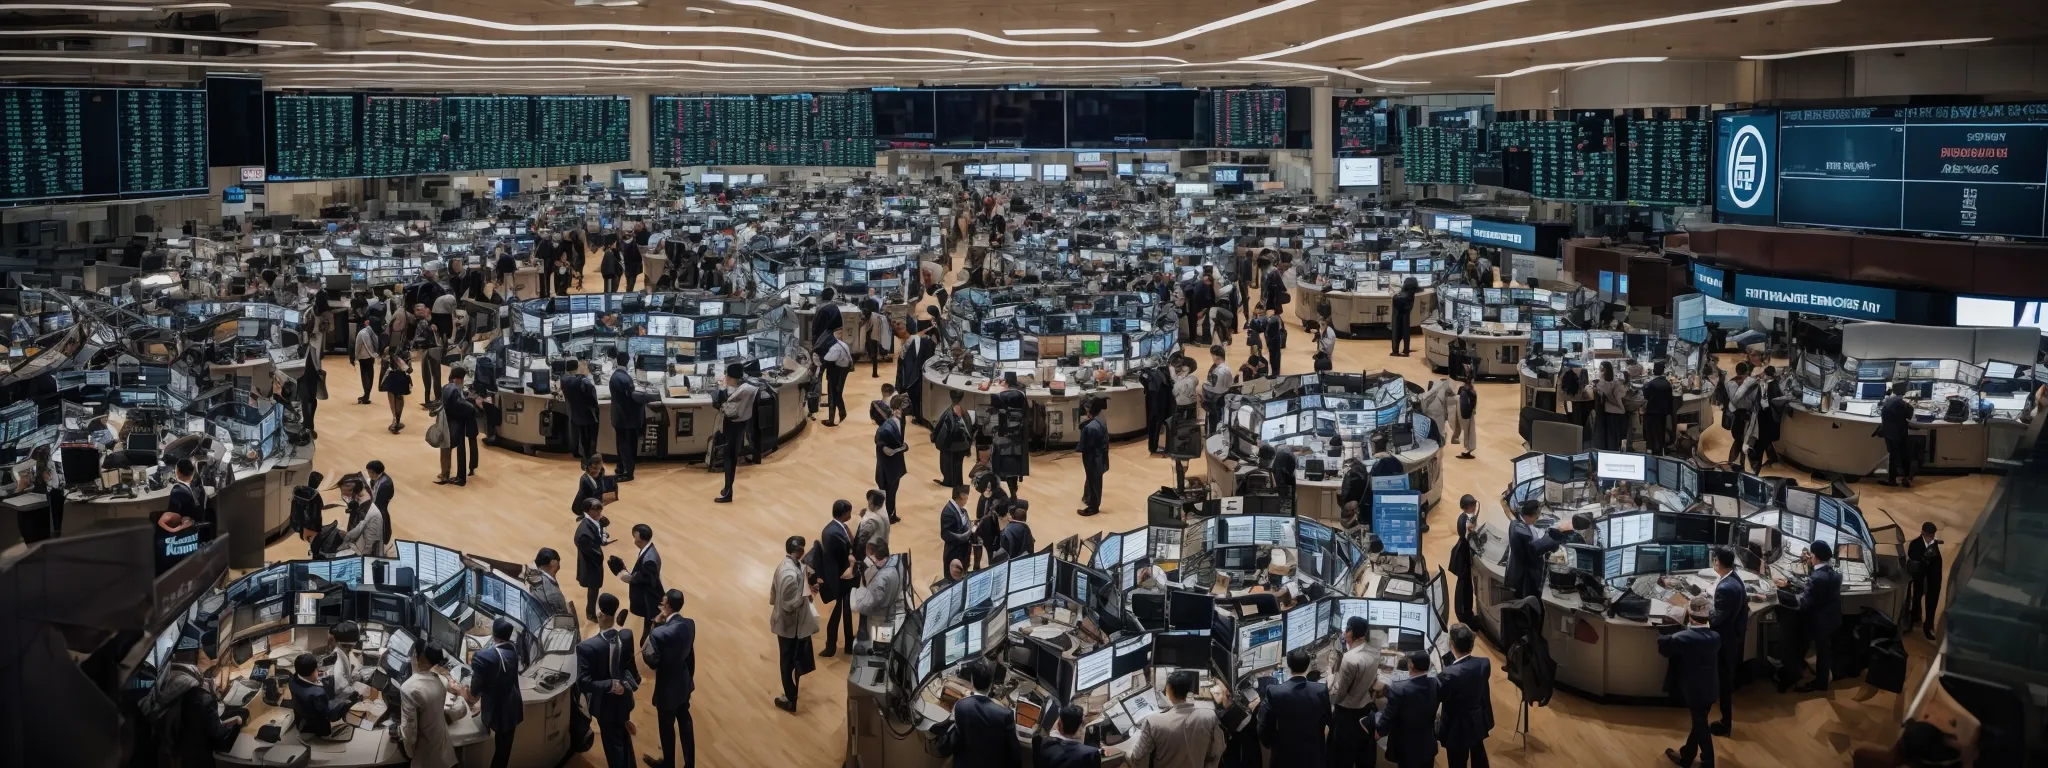 a bustling stock market trading floor where focused traders are engaging with electronic markets, symbolizing dynamic business growth through strategic investments.